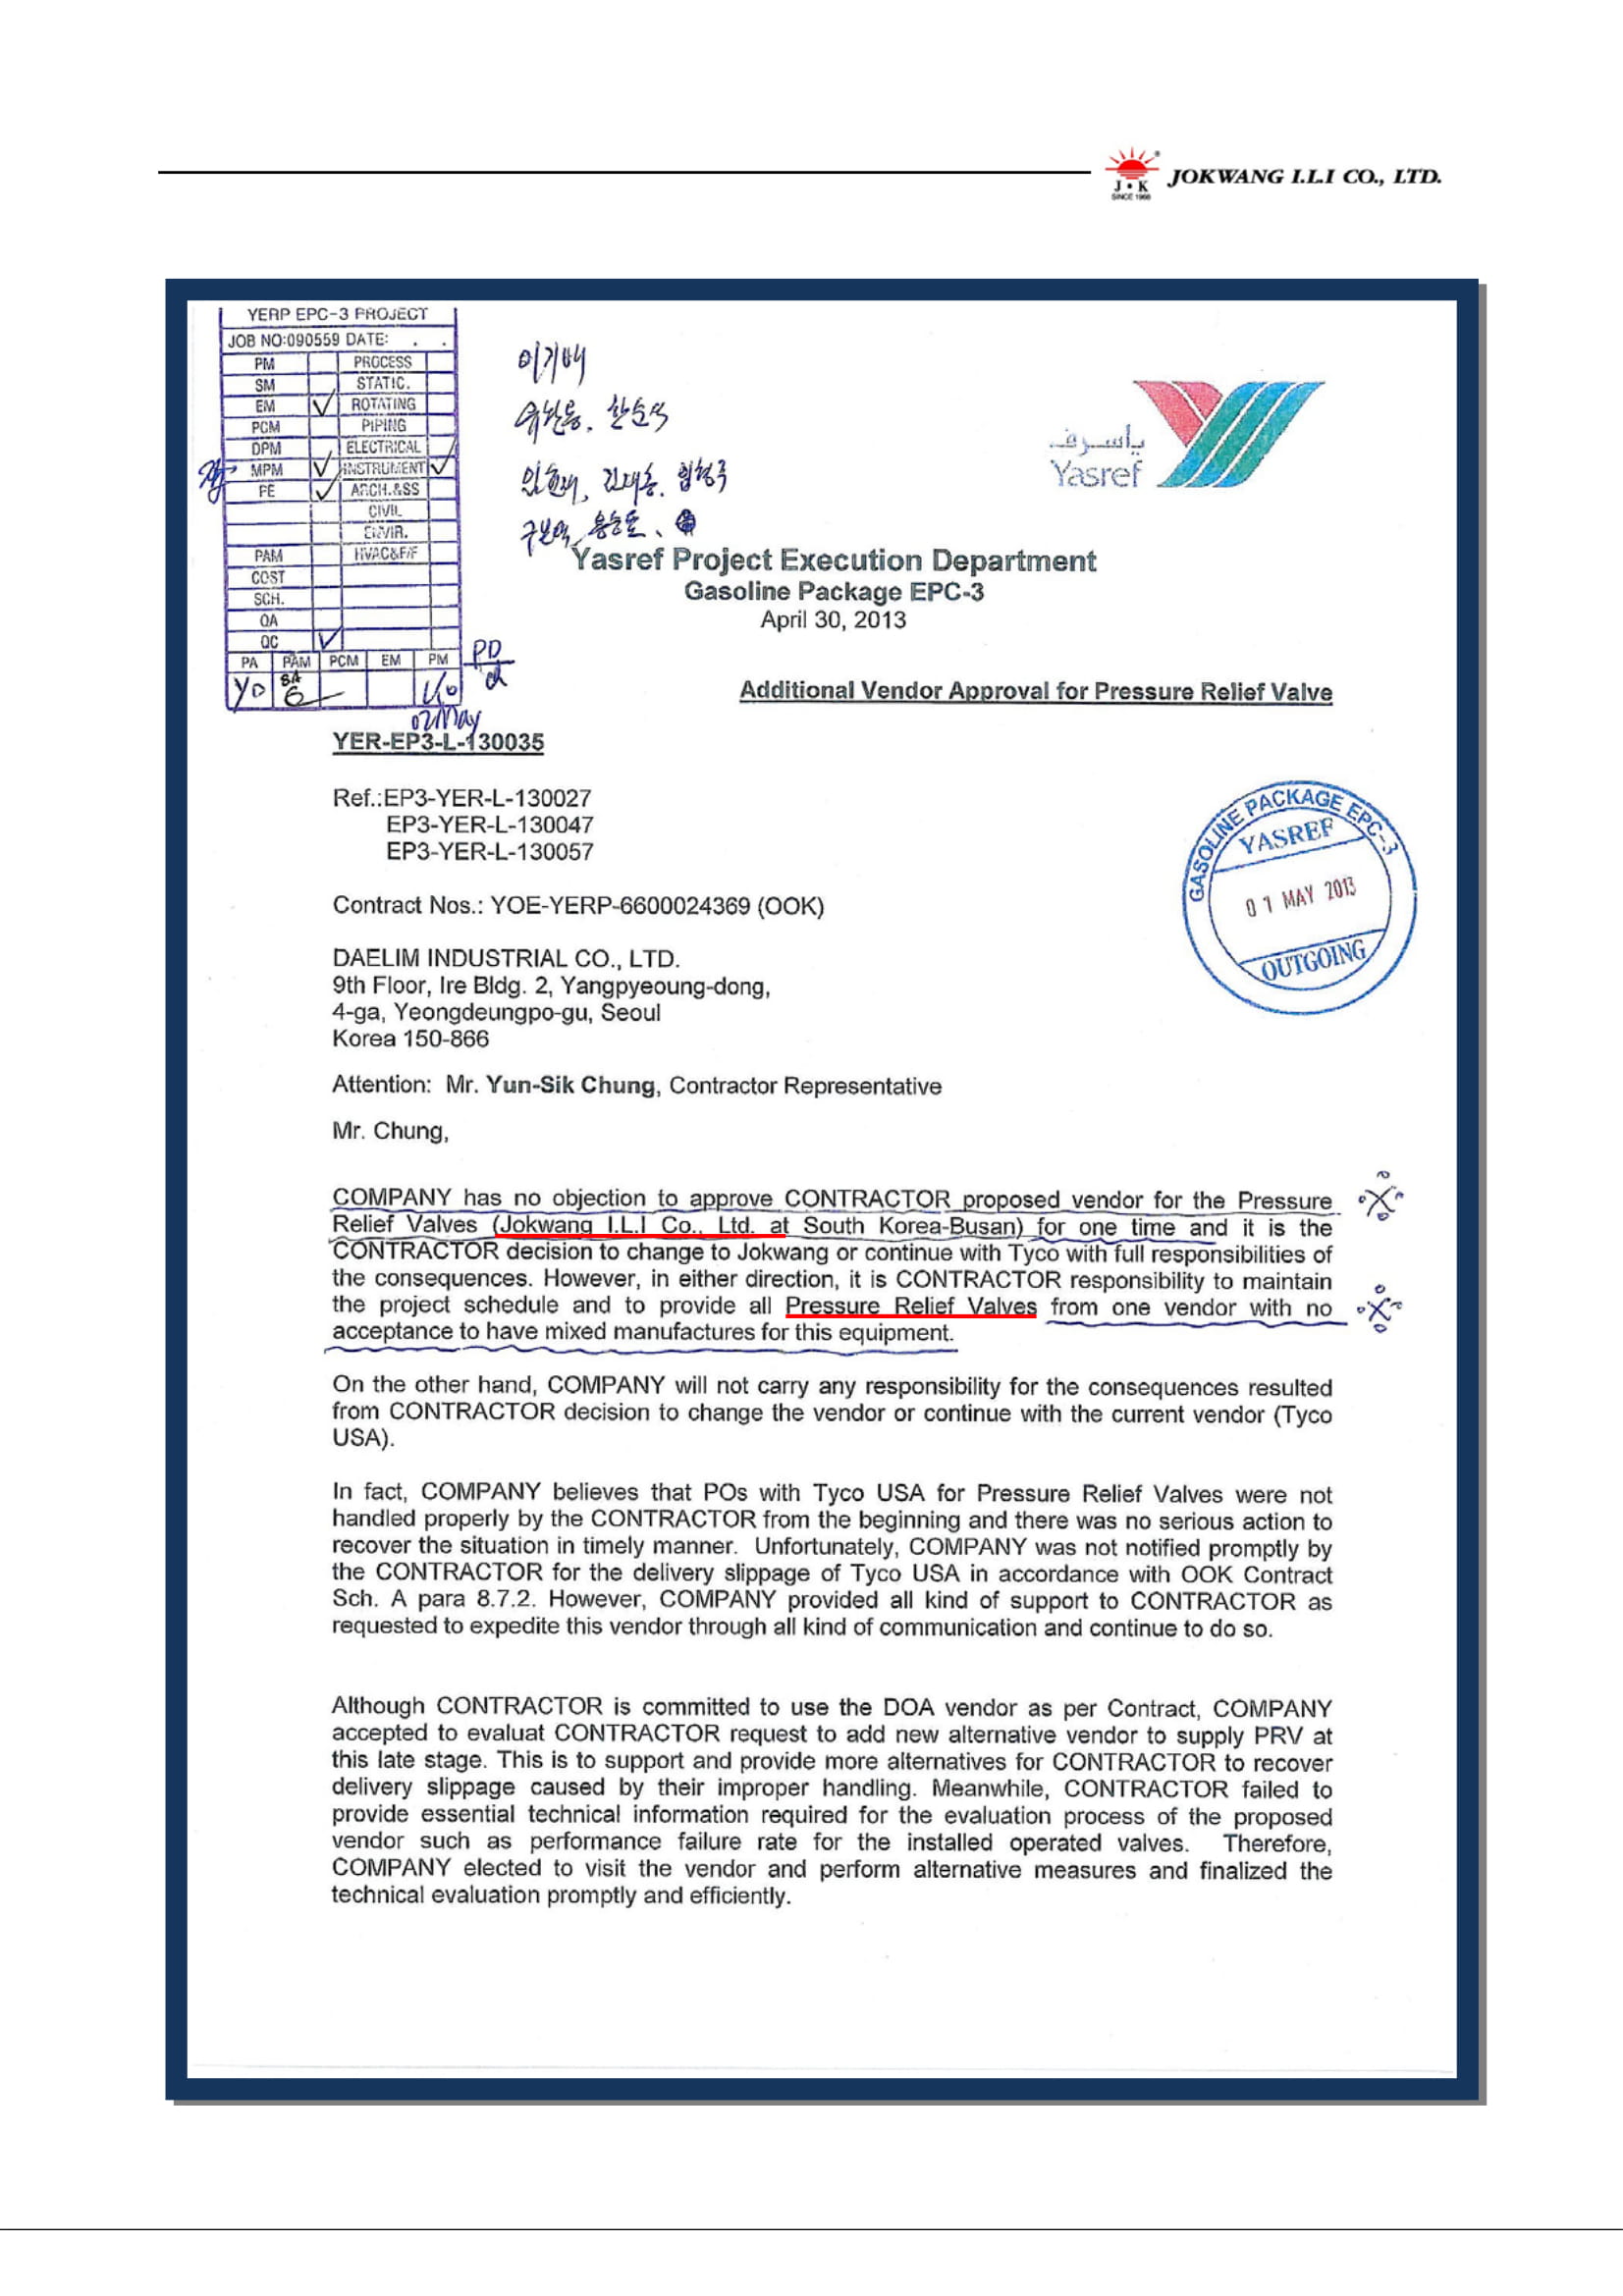 1. ARAMCO_Pressure Relief Valve-One time approval for yasref project-1.jpg